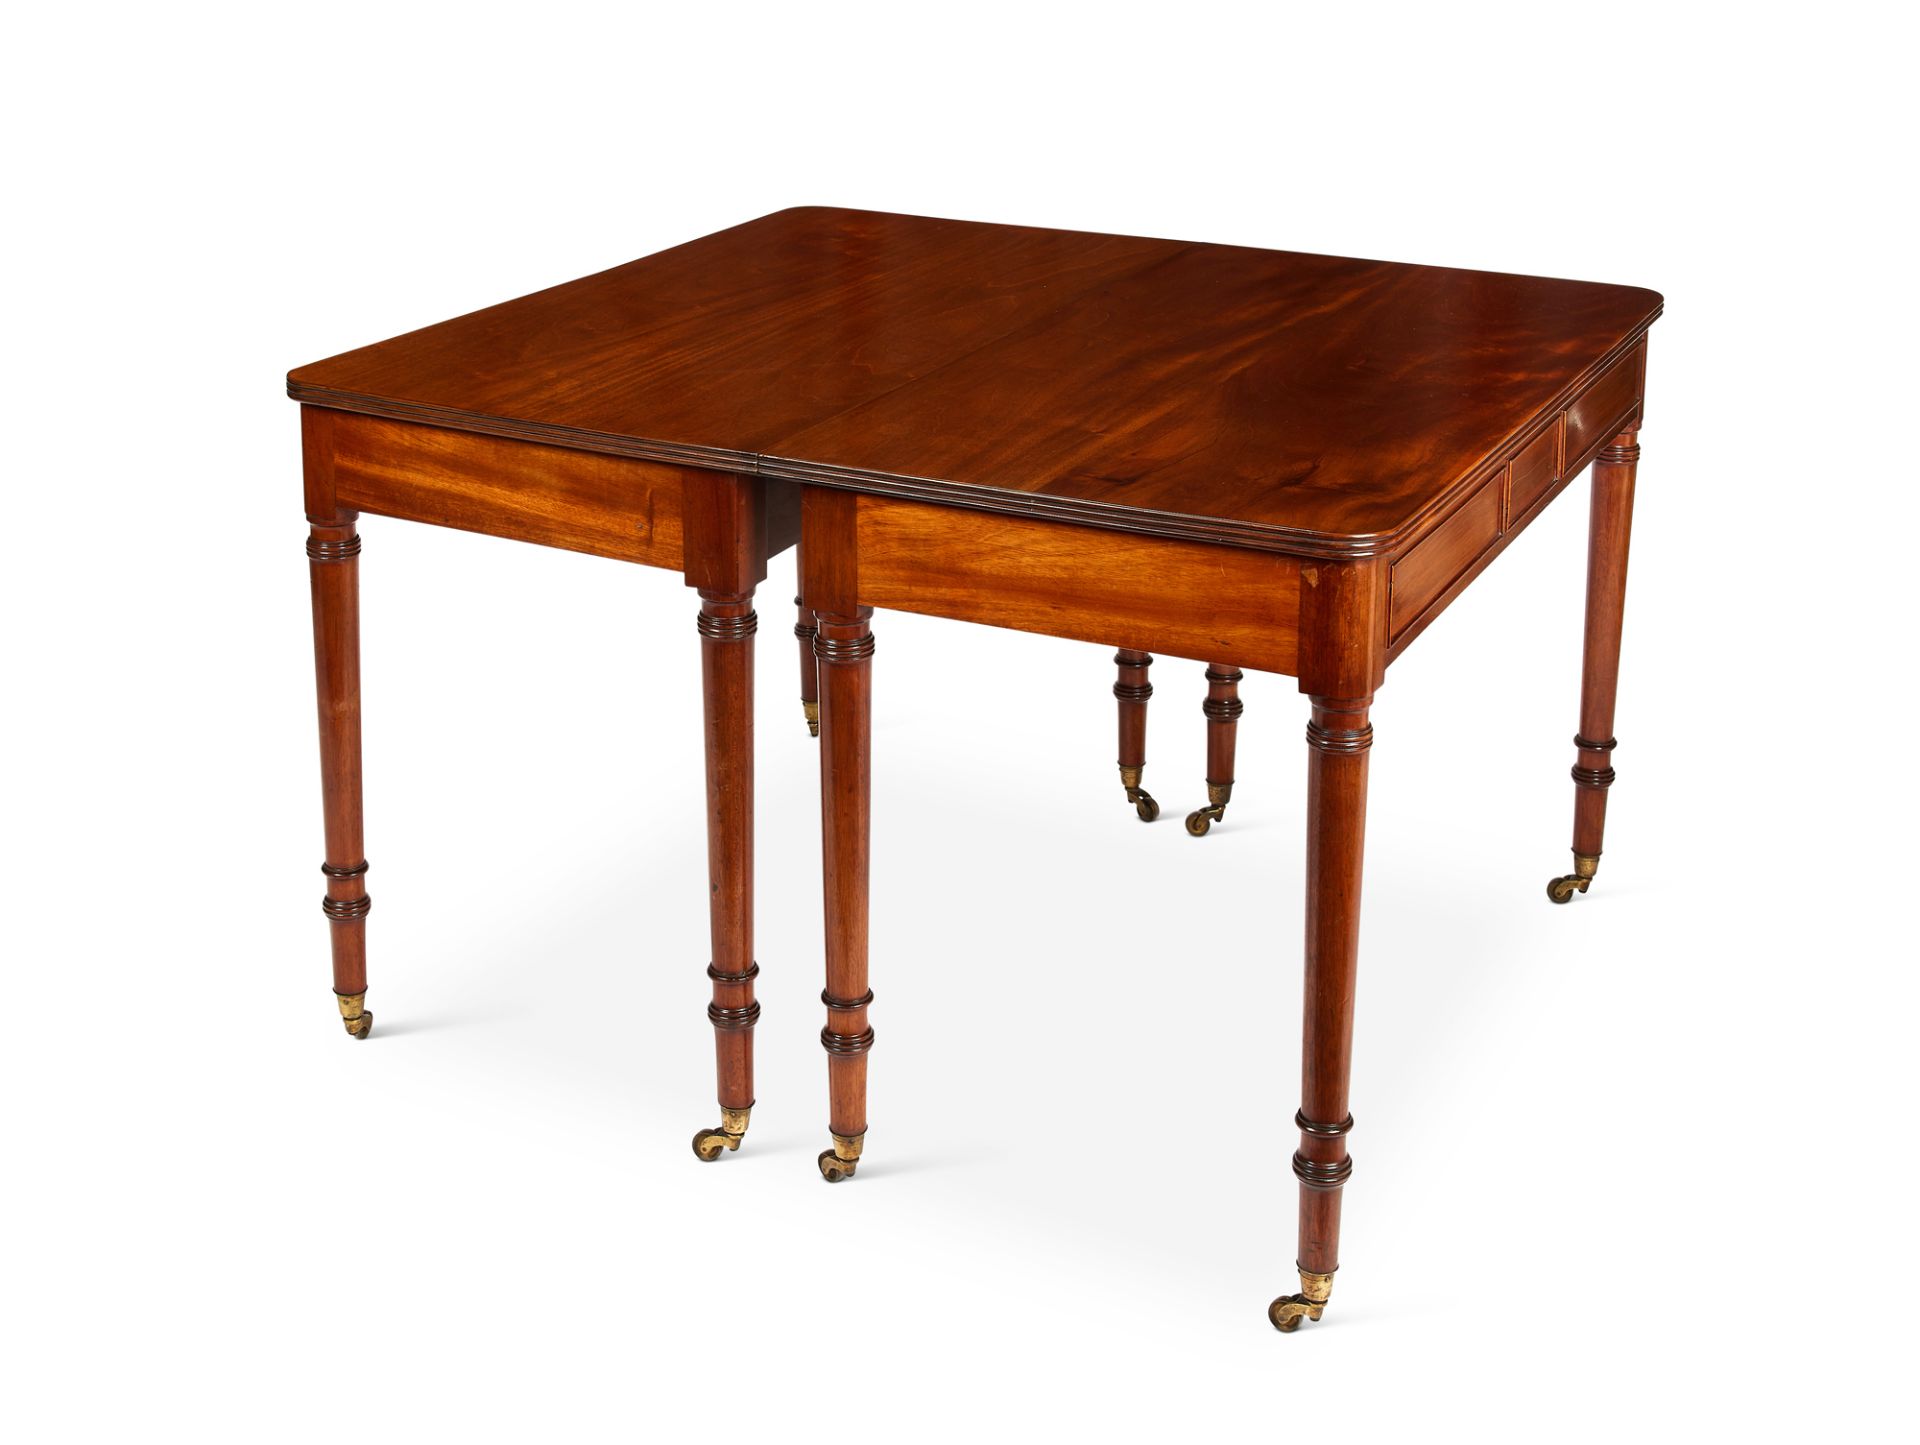 A late George III style mahogany dining table - Image 2 of 6